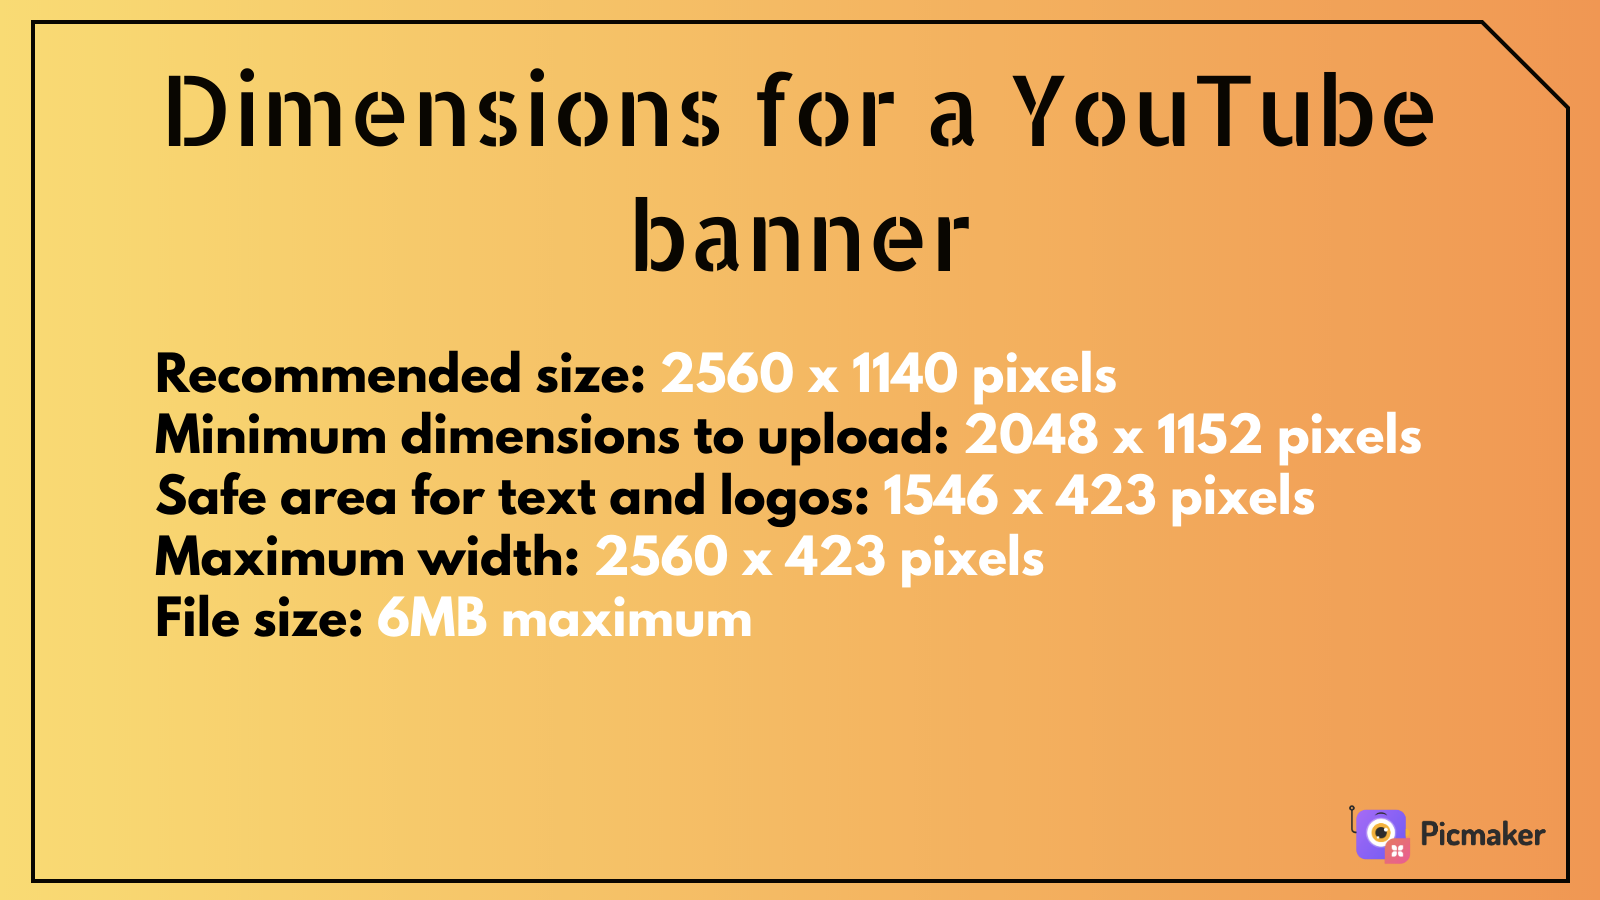 Average dimensions of a YouTube banner - Picmaker